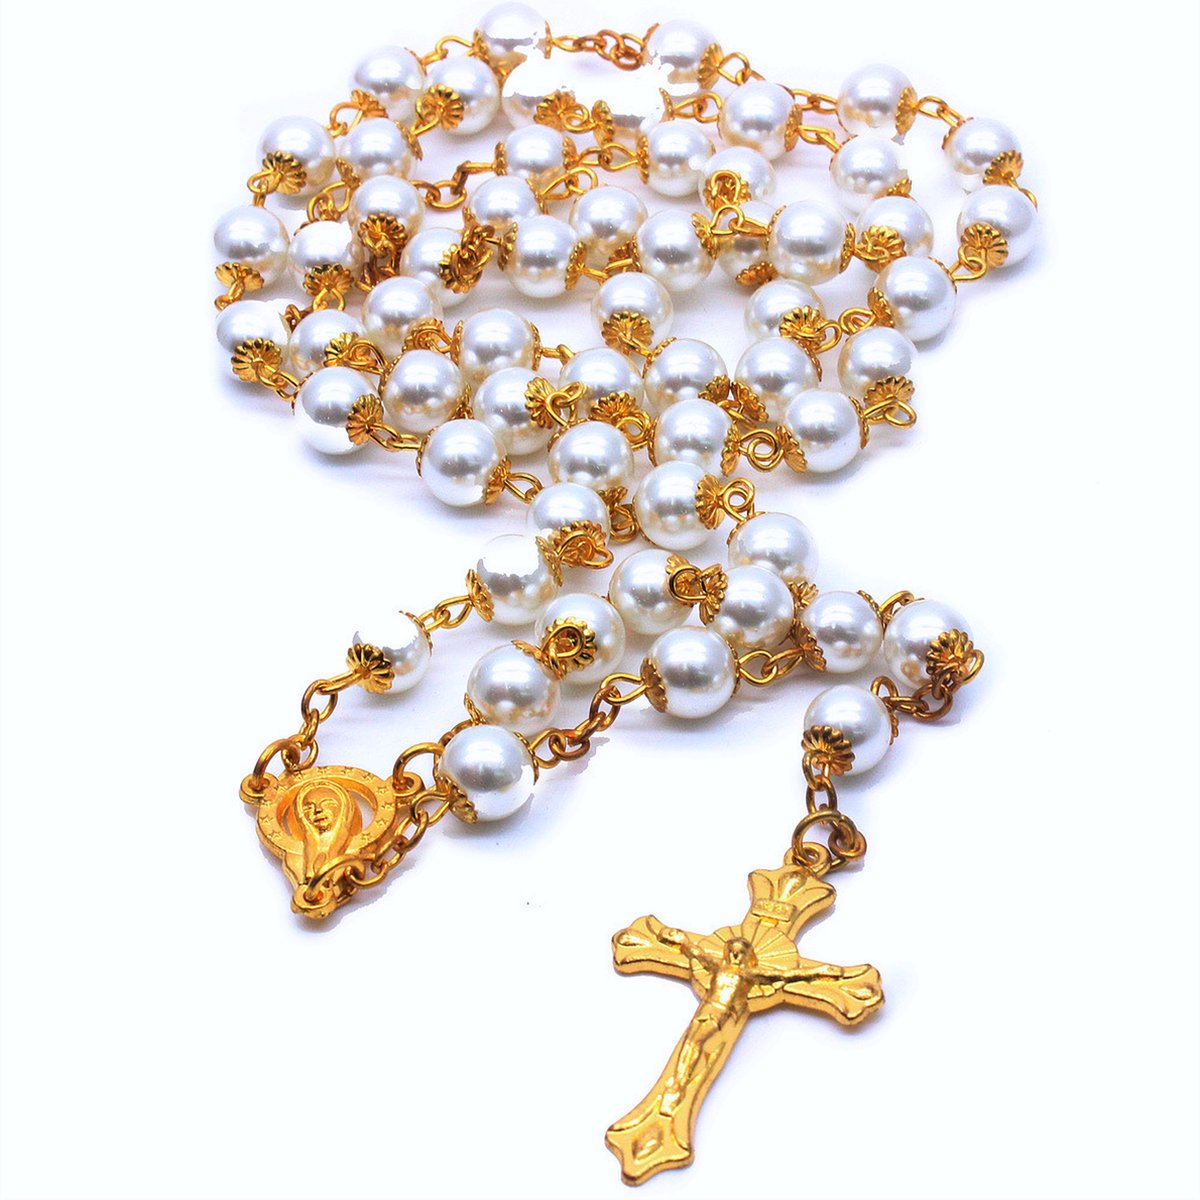 ICYBOY 18K Religieus Witte Parel Bedel Ketting met Jezus Kruis Pendant Verguld Goud [GOLD-PLATED] [ICED OUT] [50CM] - White Pearl Prayer Beads Necklace Gold Virgin Mary Pendant Jesus Cross Necklace for Christian Religion